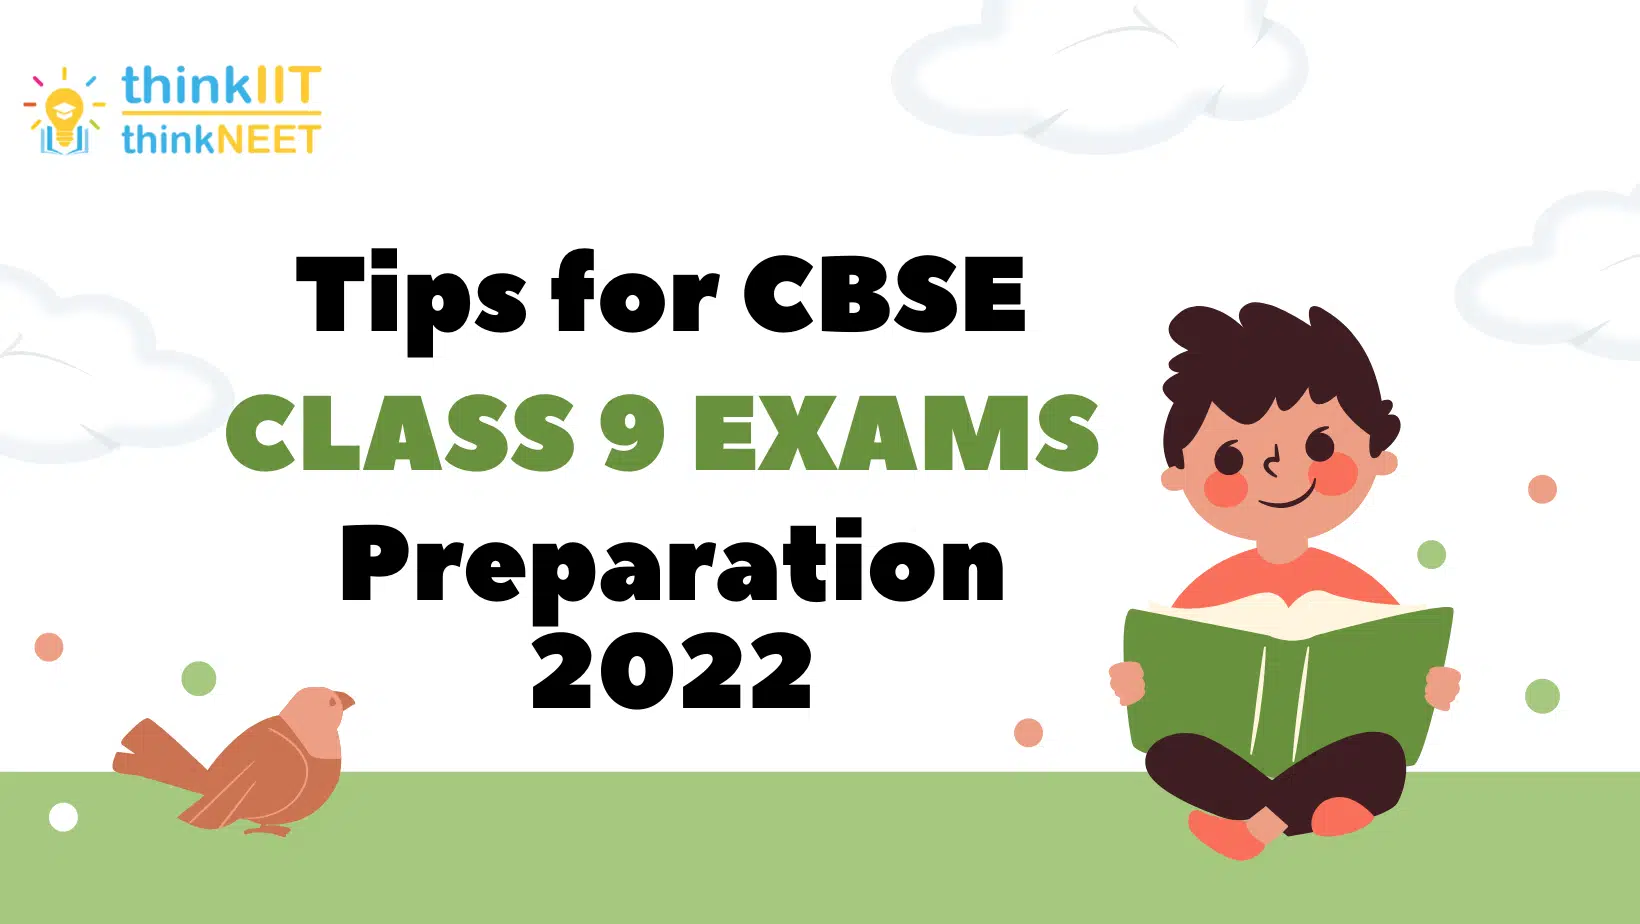 Tips for CBSE Class 9 Exams Preparation 2022